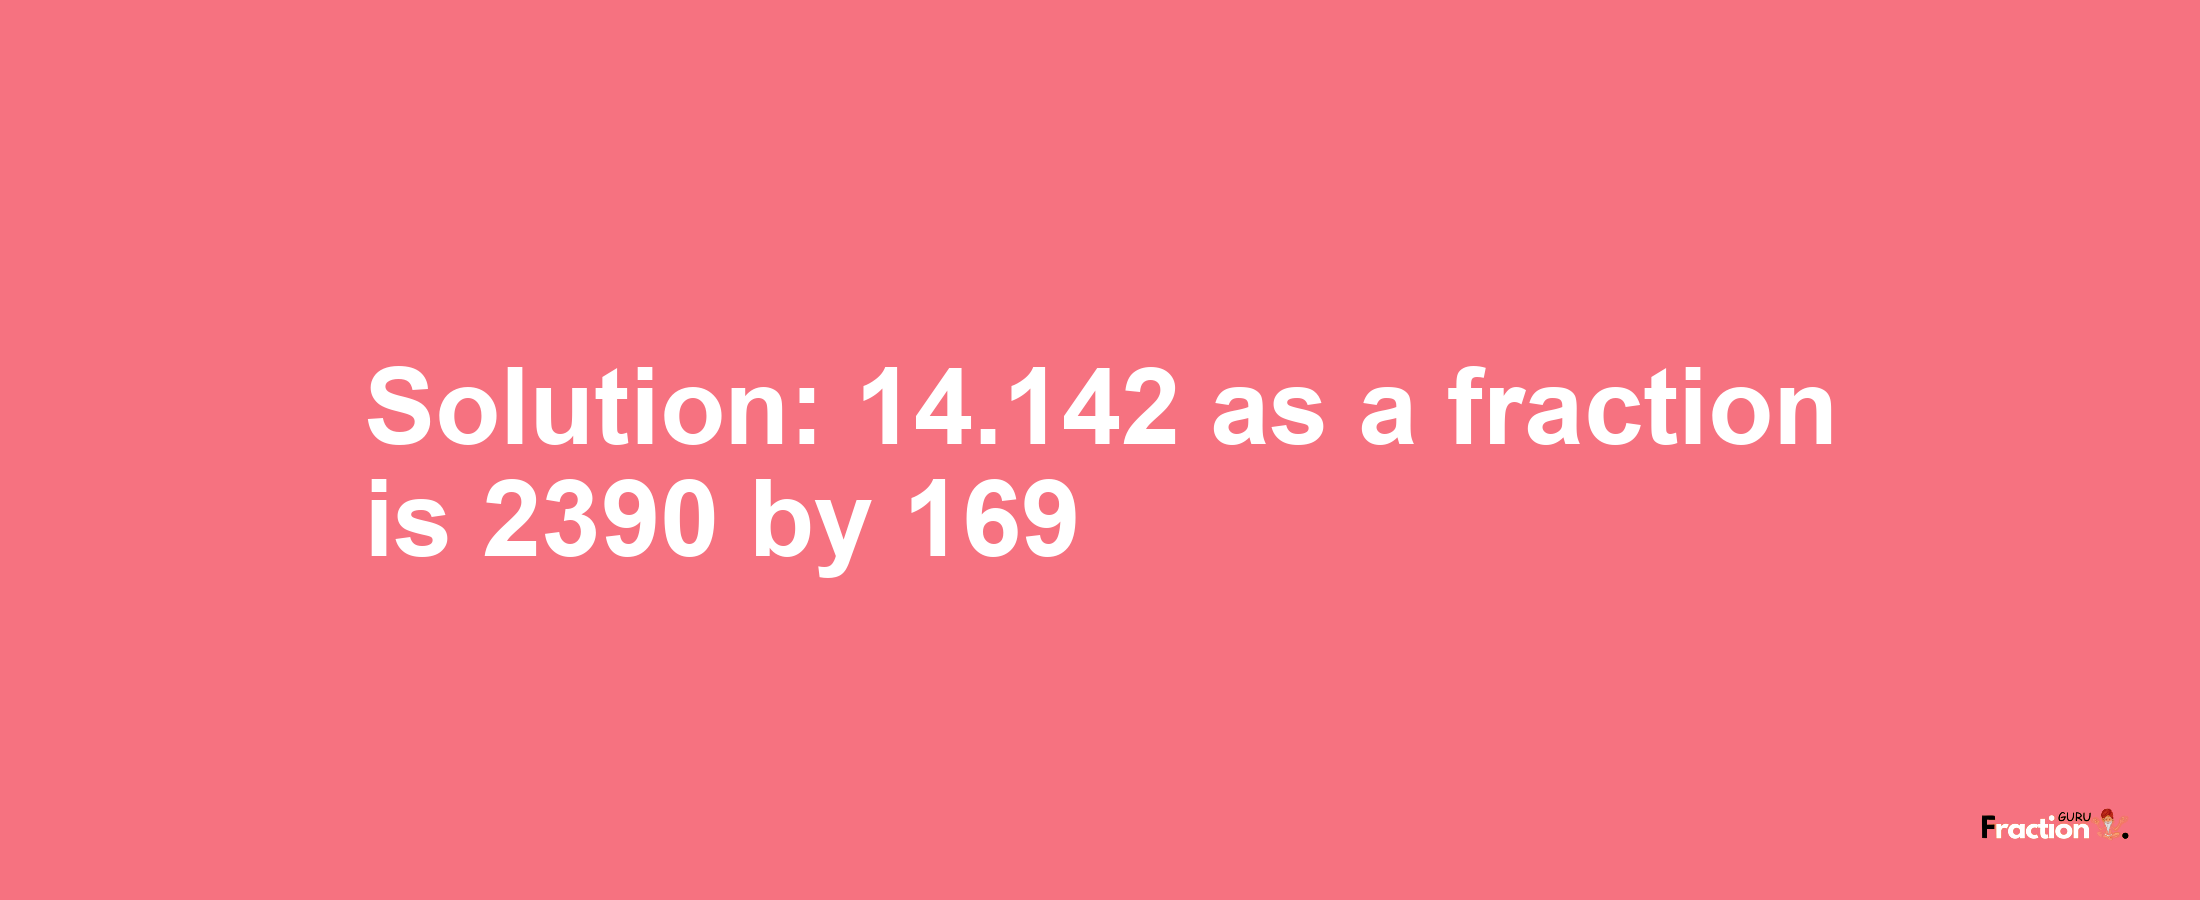 Solution:14.142 as a fraction is 2390/169